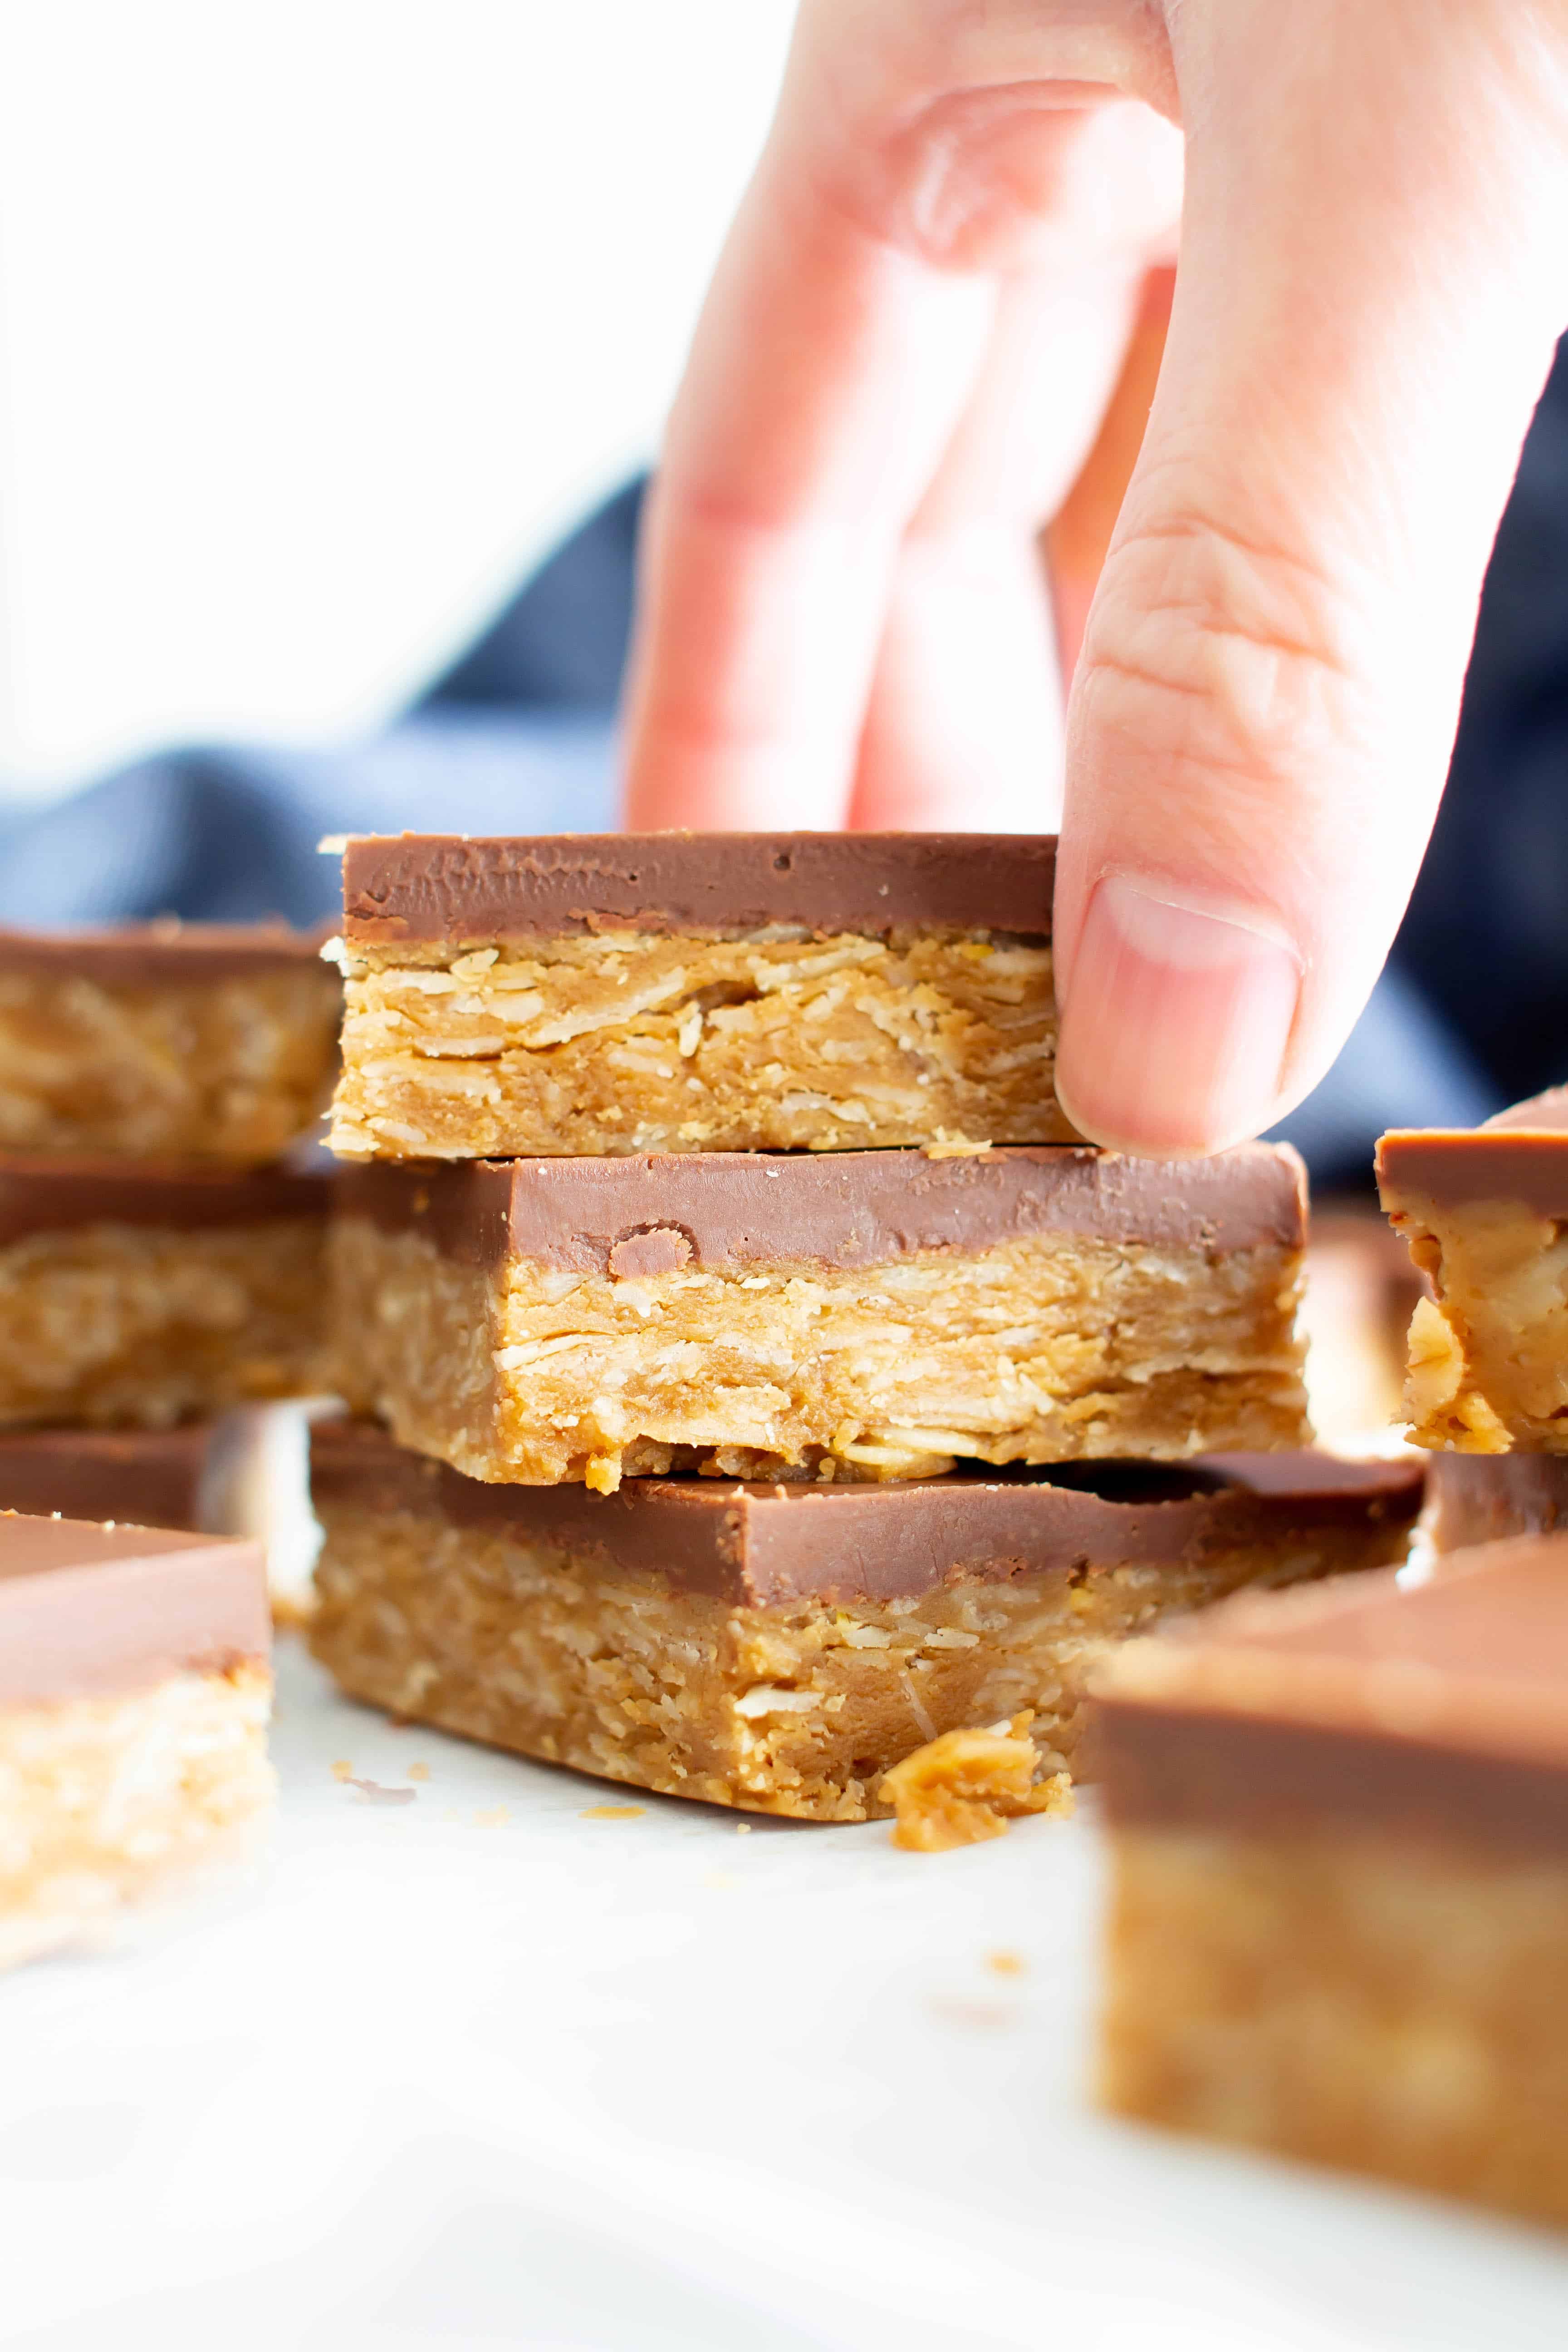 4 Ingredient Healthy No Bake Peanut Butter Cup Oat Bars: this vegan peanut butter oatmeal bars recipe is so easy to make & tastes like peanut butter cups! Chewy peanut butter oatmeal bars with a thick, chocolate topping. #Vegan #GlutenFree #Healthy #PeanutButter #Oats #Oatmeal | Recipe at BeamingBaker.com